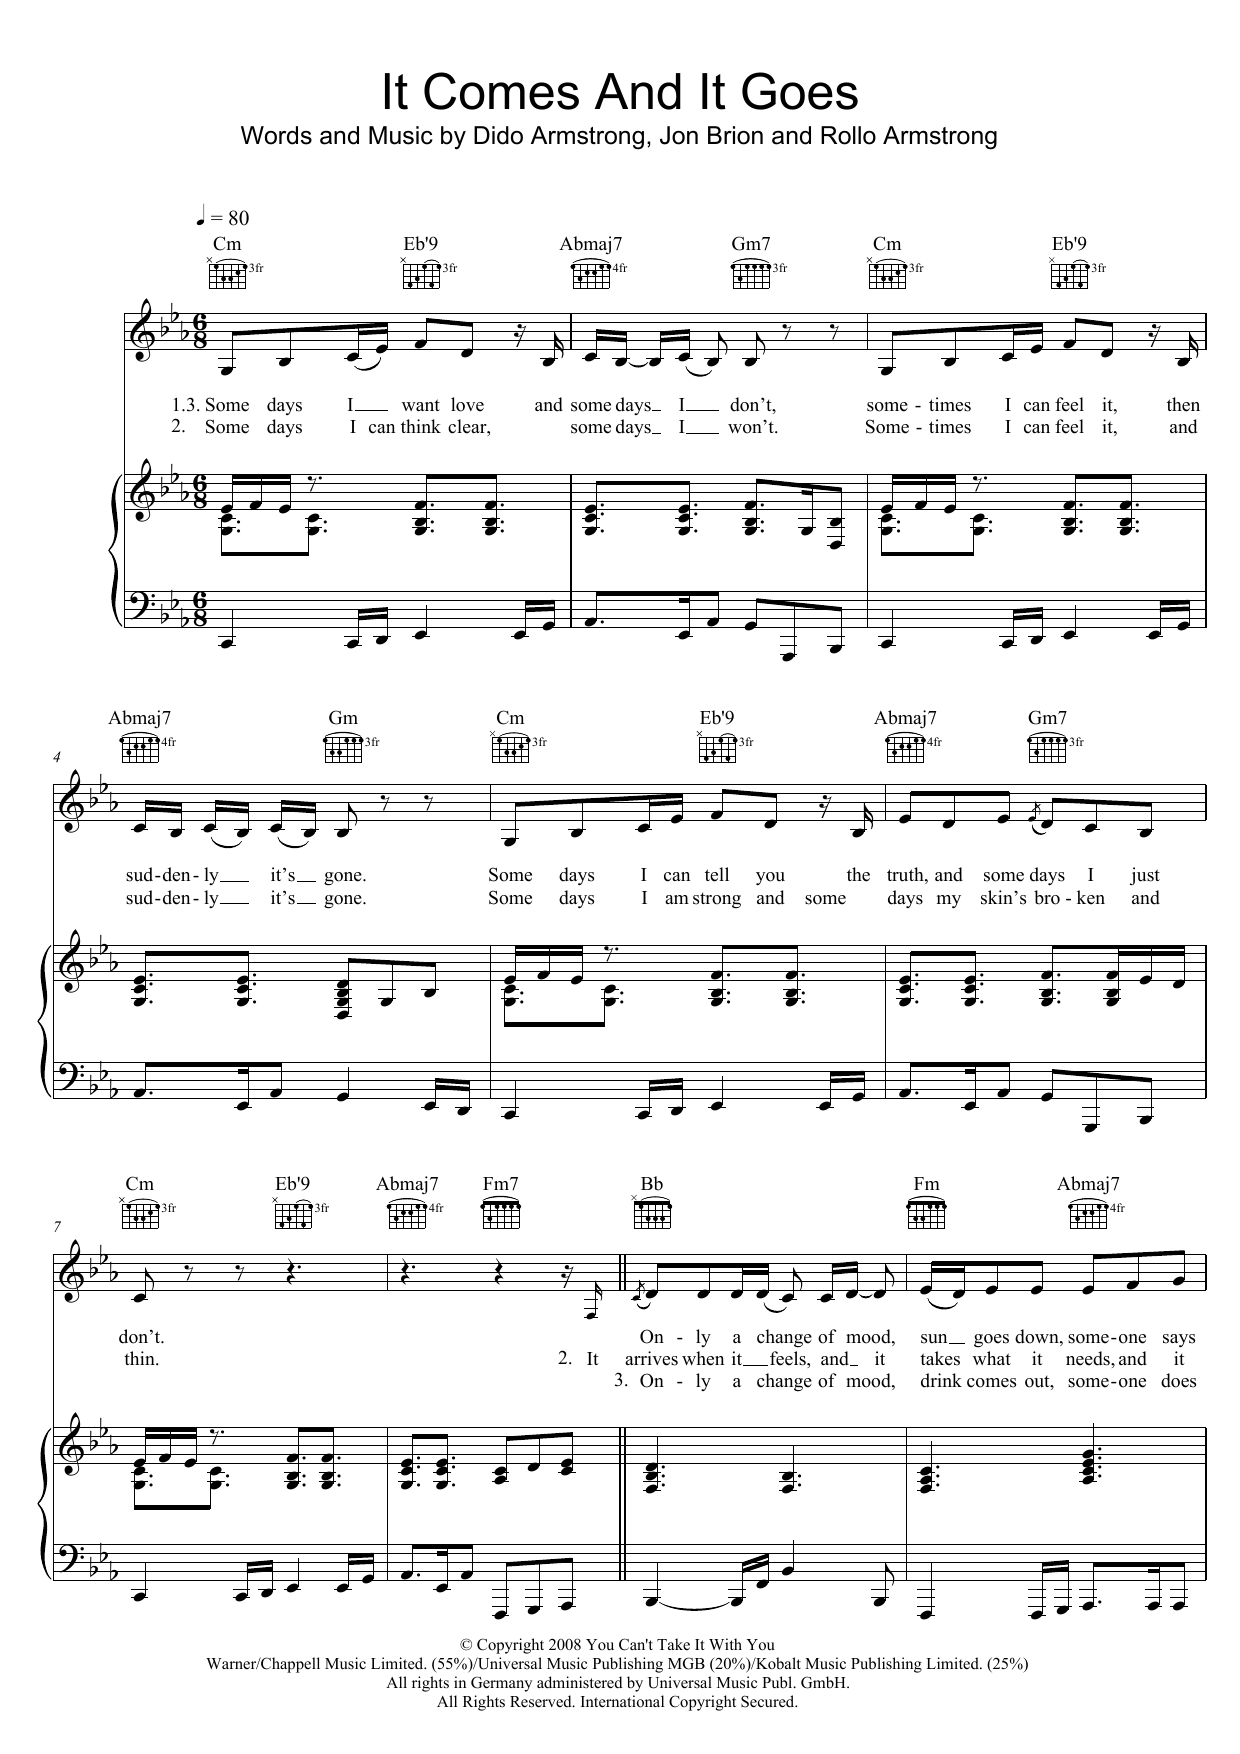 Download Dido It Comes And It Goes Sheet Music